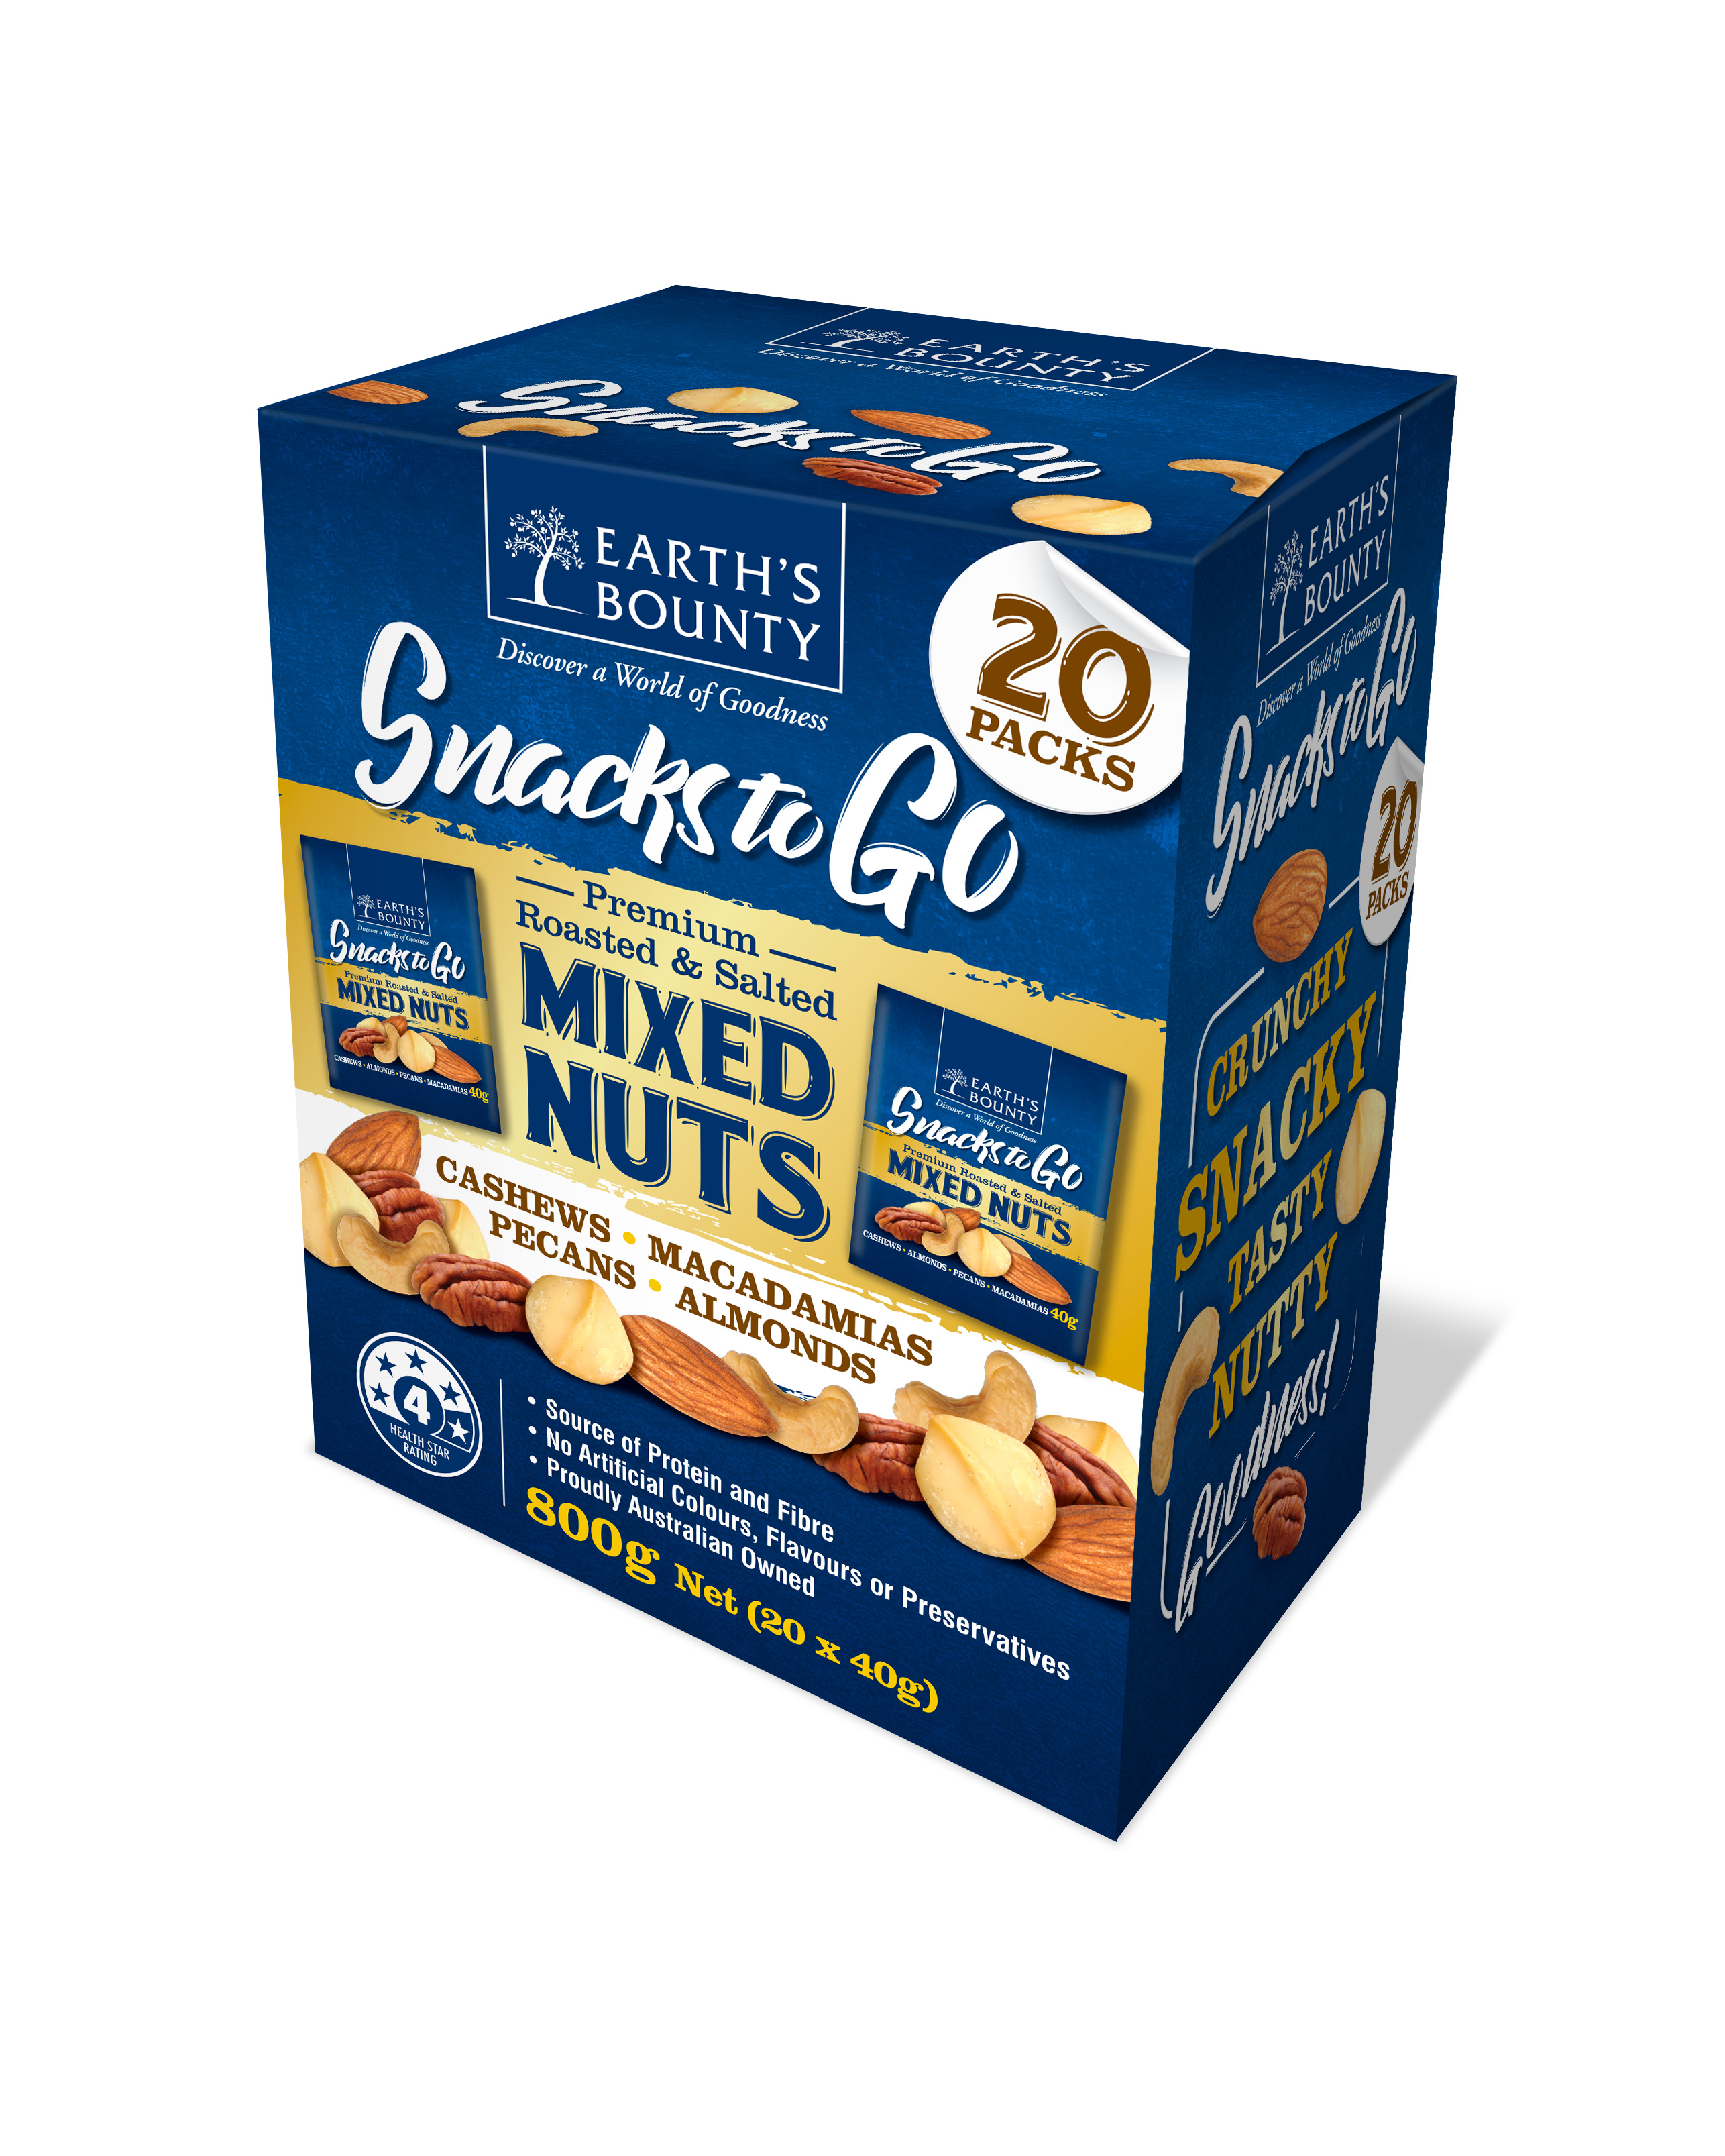 Snacks to Go - Dry Roasted Mixed Nuts